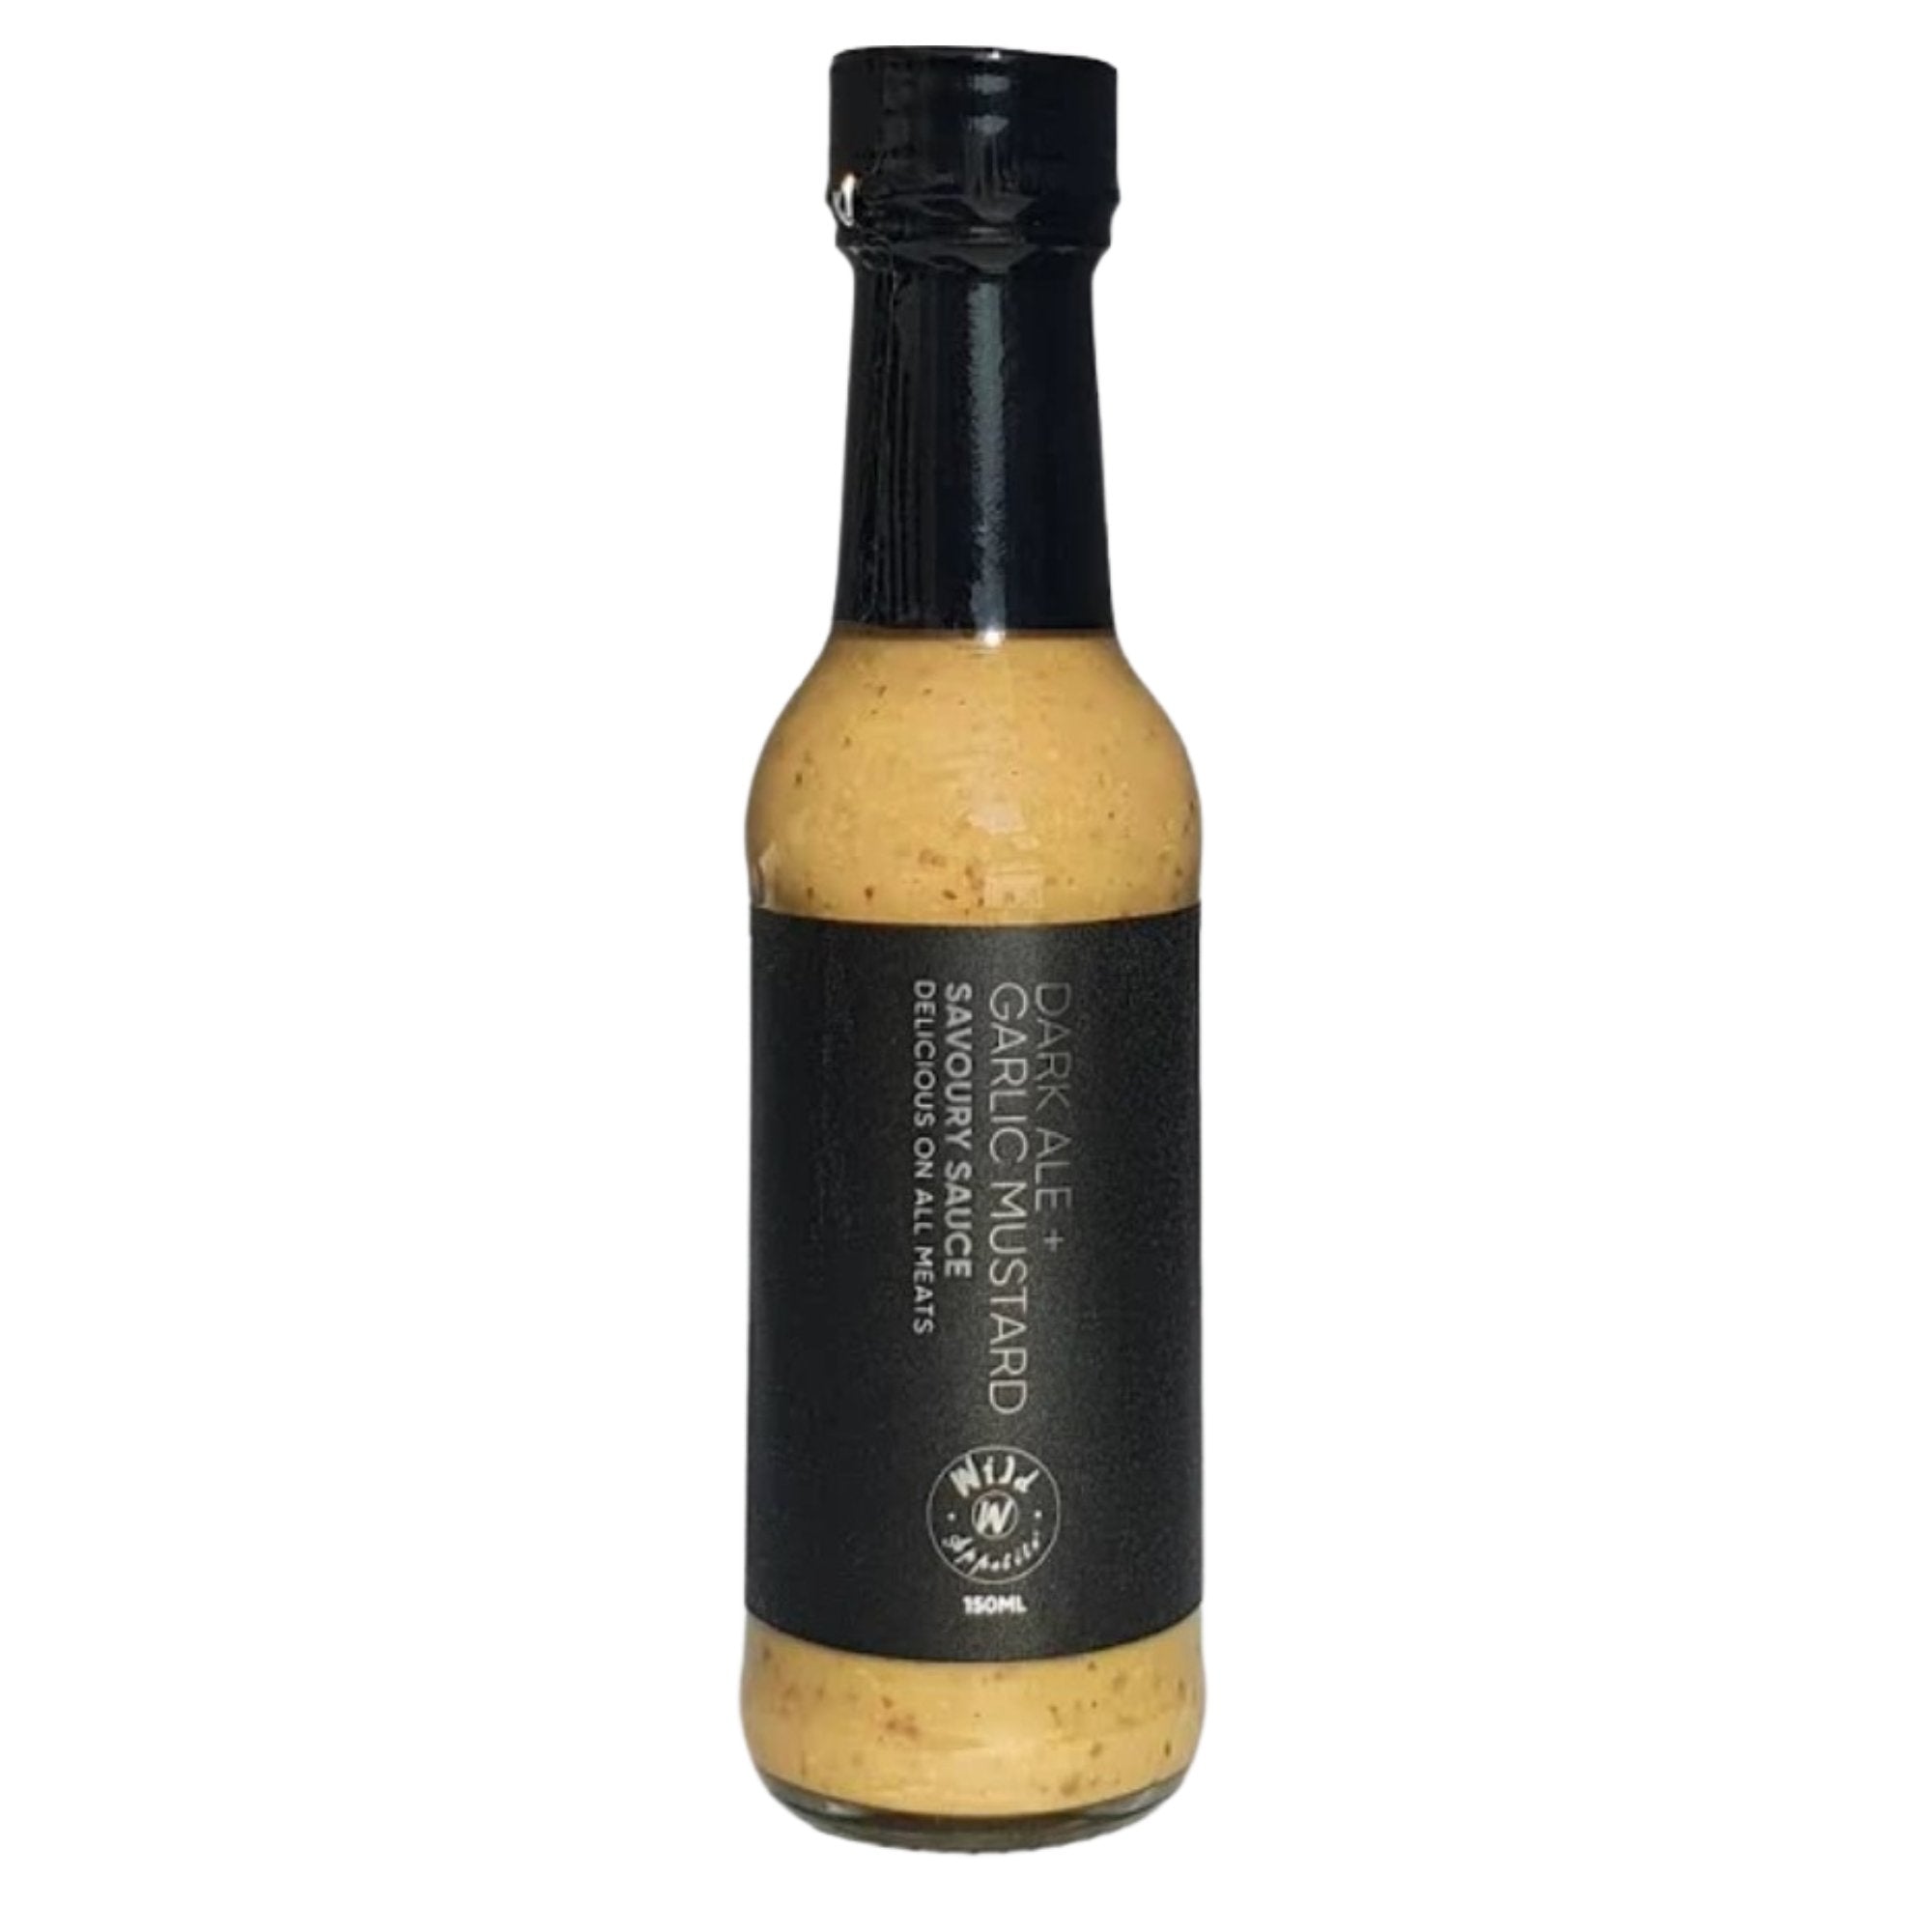 Dark ale and garlic mustard sauce 150ml - Beautiful Gifts - Packaged with Love